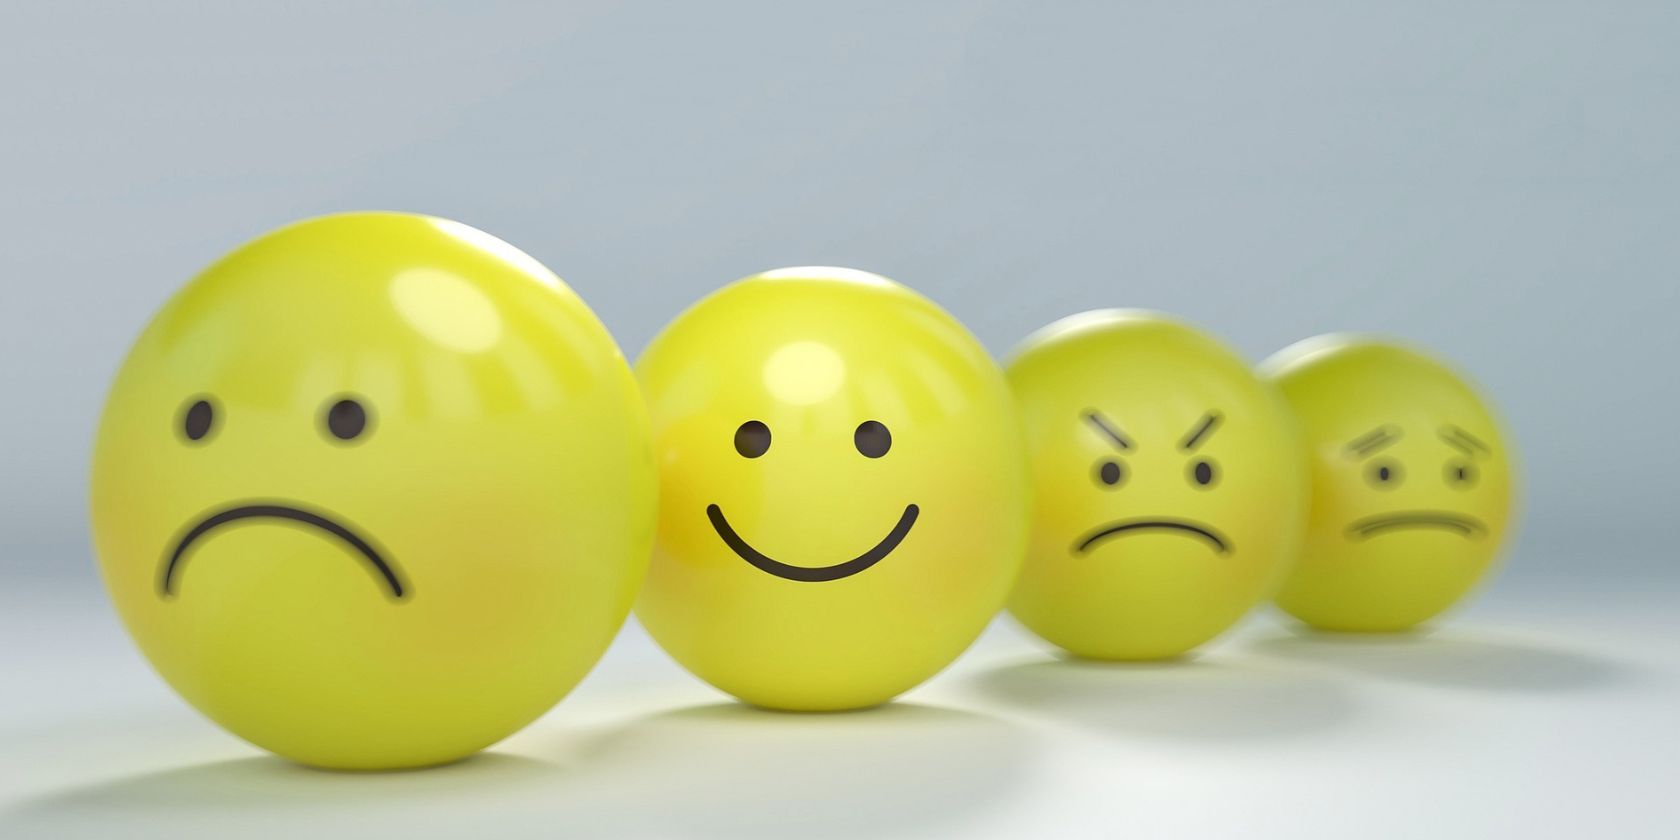 Four yellow balls with different emotions